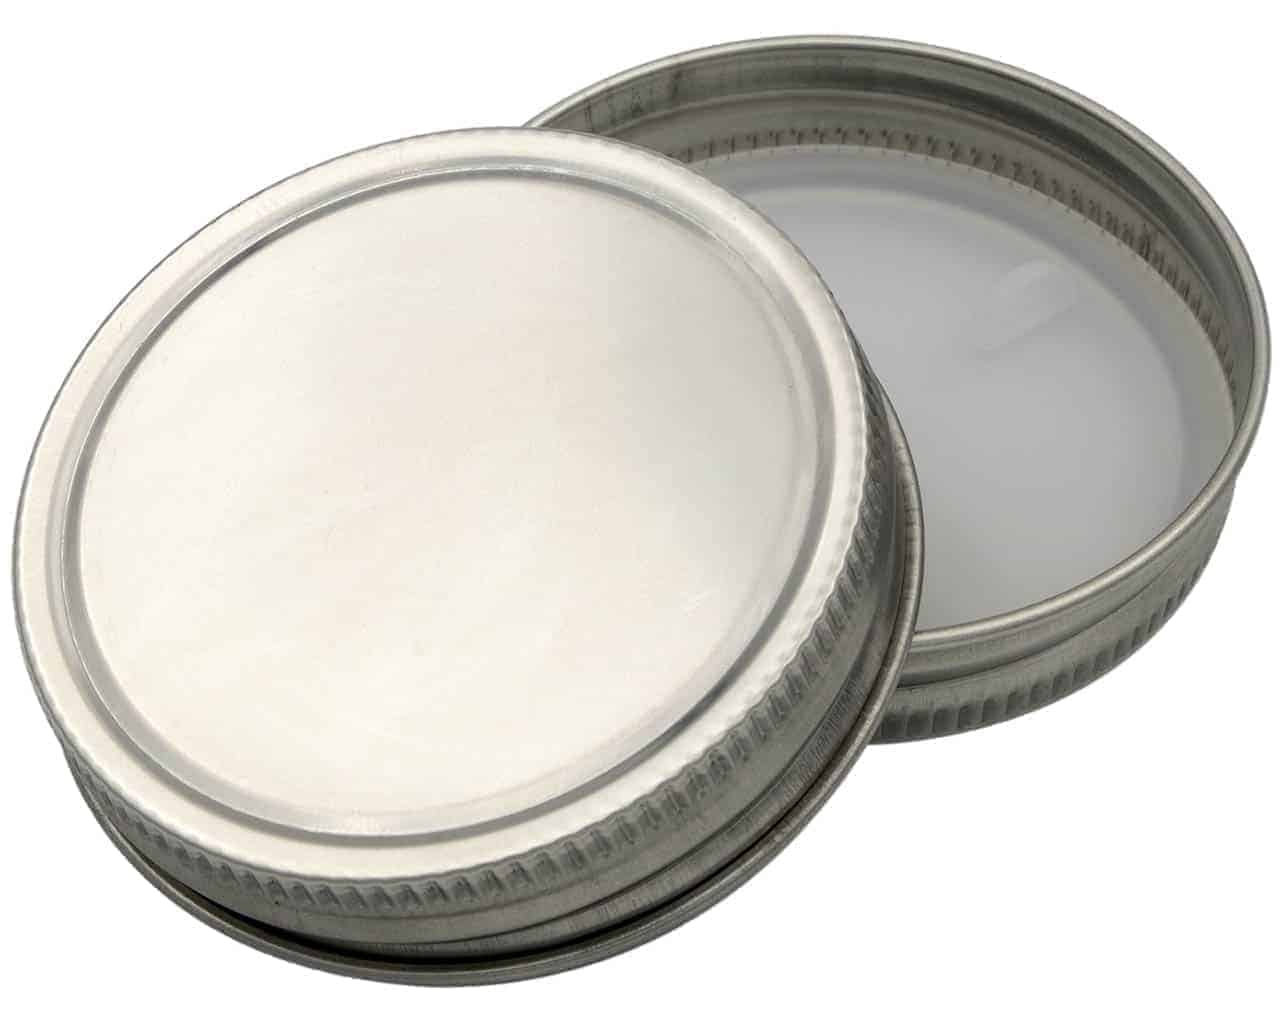 Stainless Steel Storage Lids with Silicone Seals for Mason Jars 5 Pack